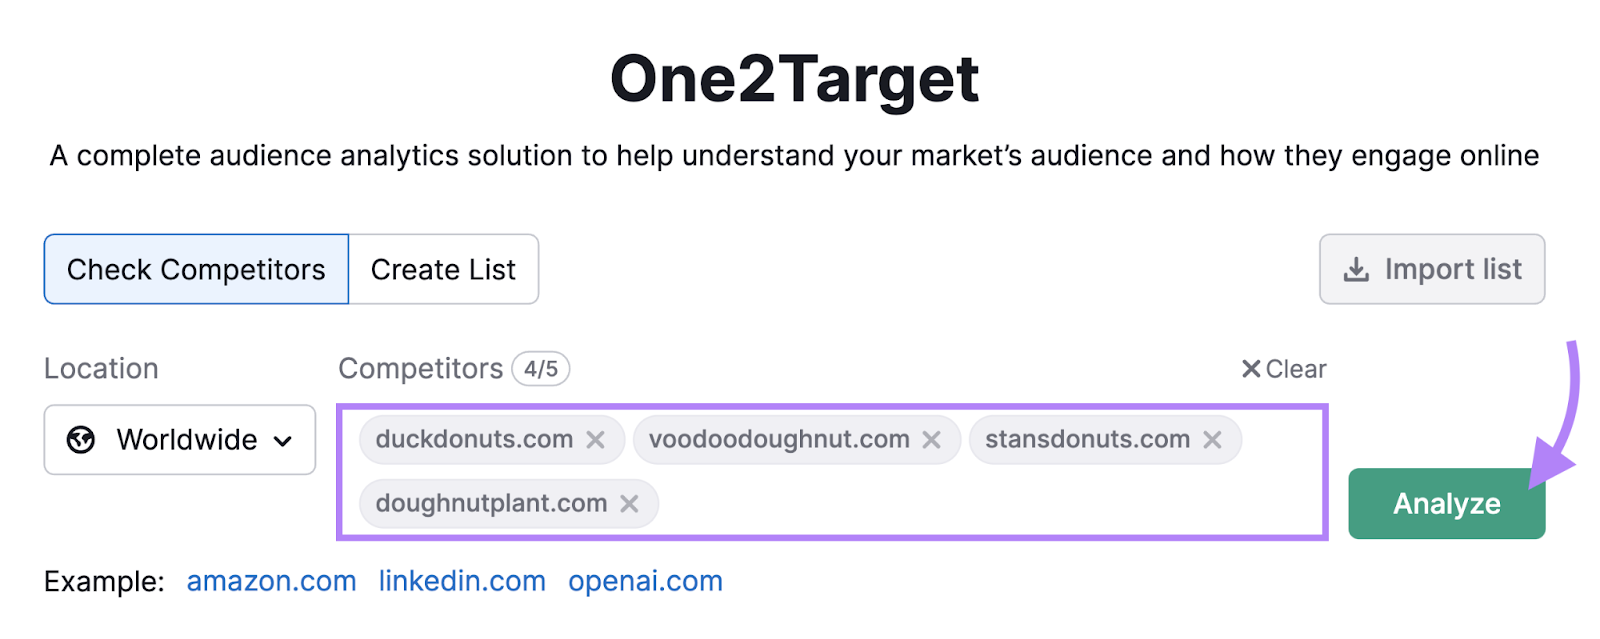 One2Target tool search bar